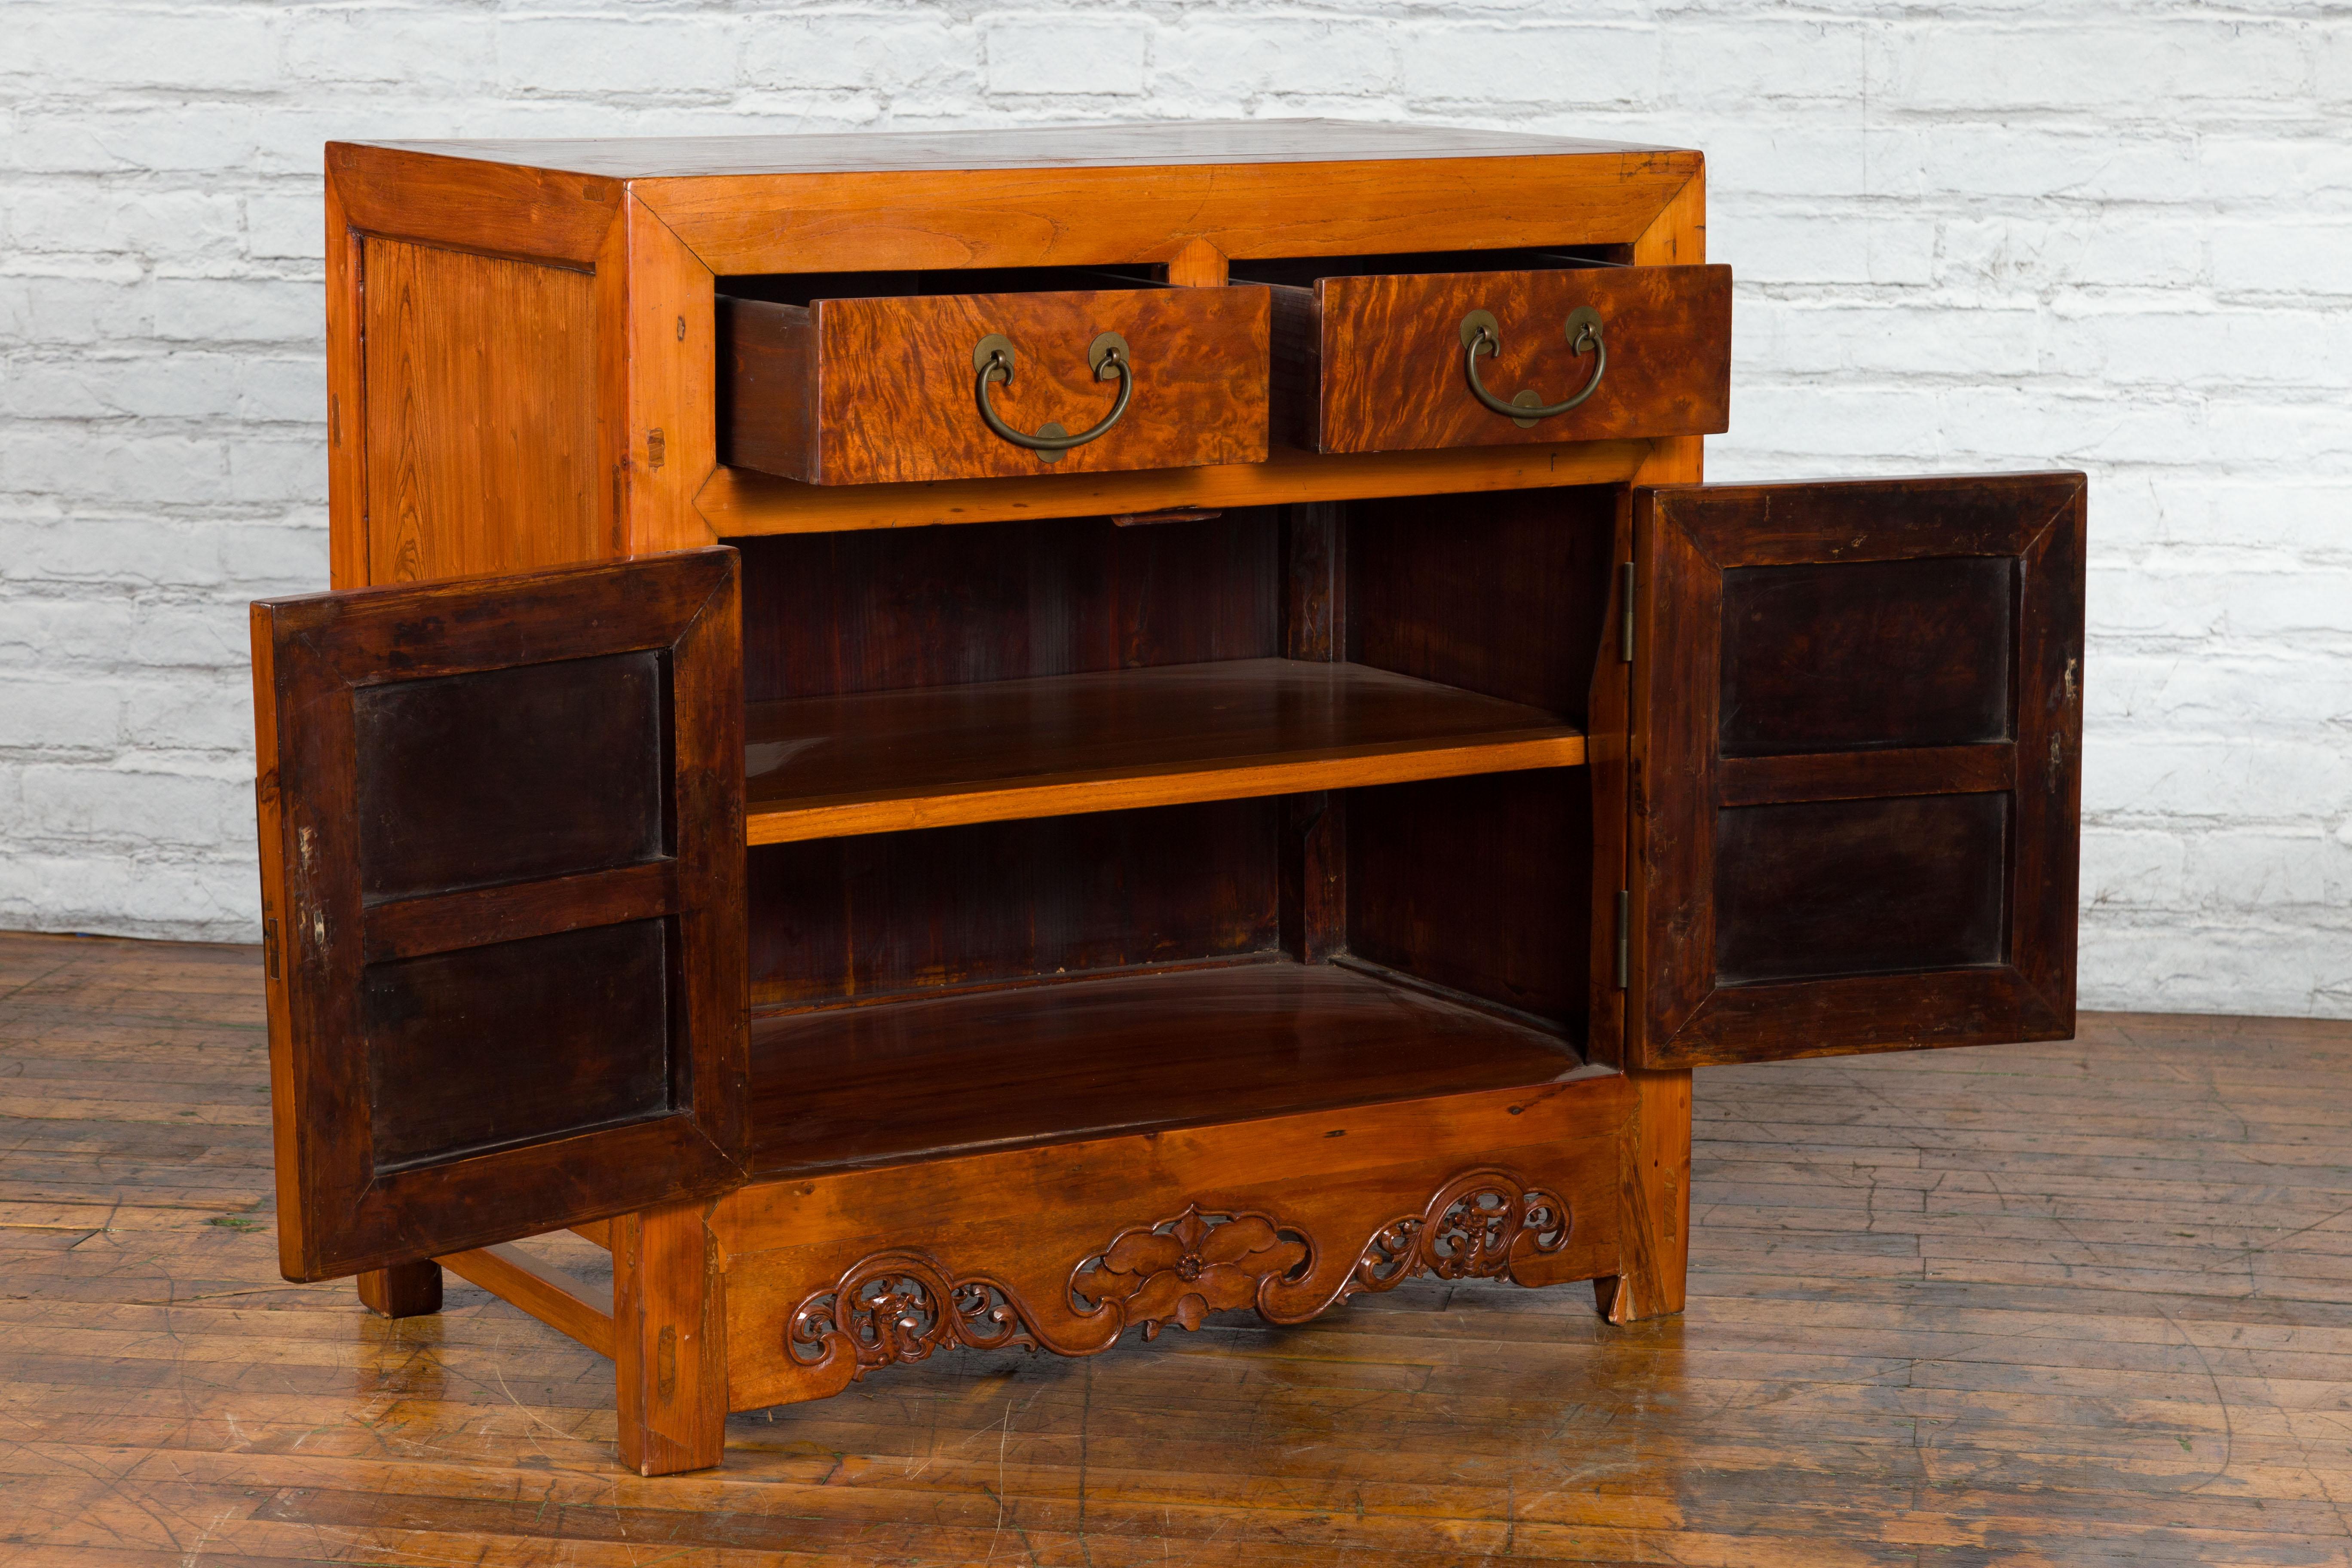 Chinese Qing Dynasty 19th Century Two-Toned Elm Cabinet with Burl Wood Accents For Sale 2